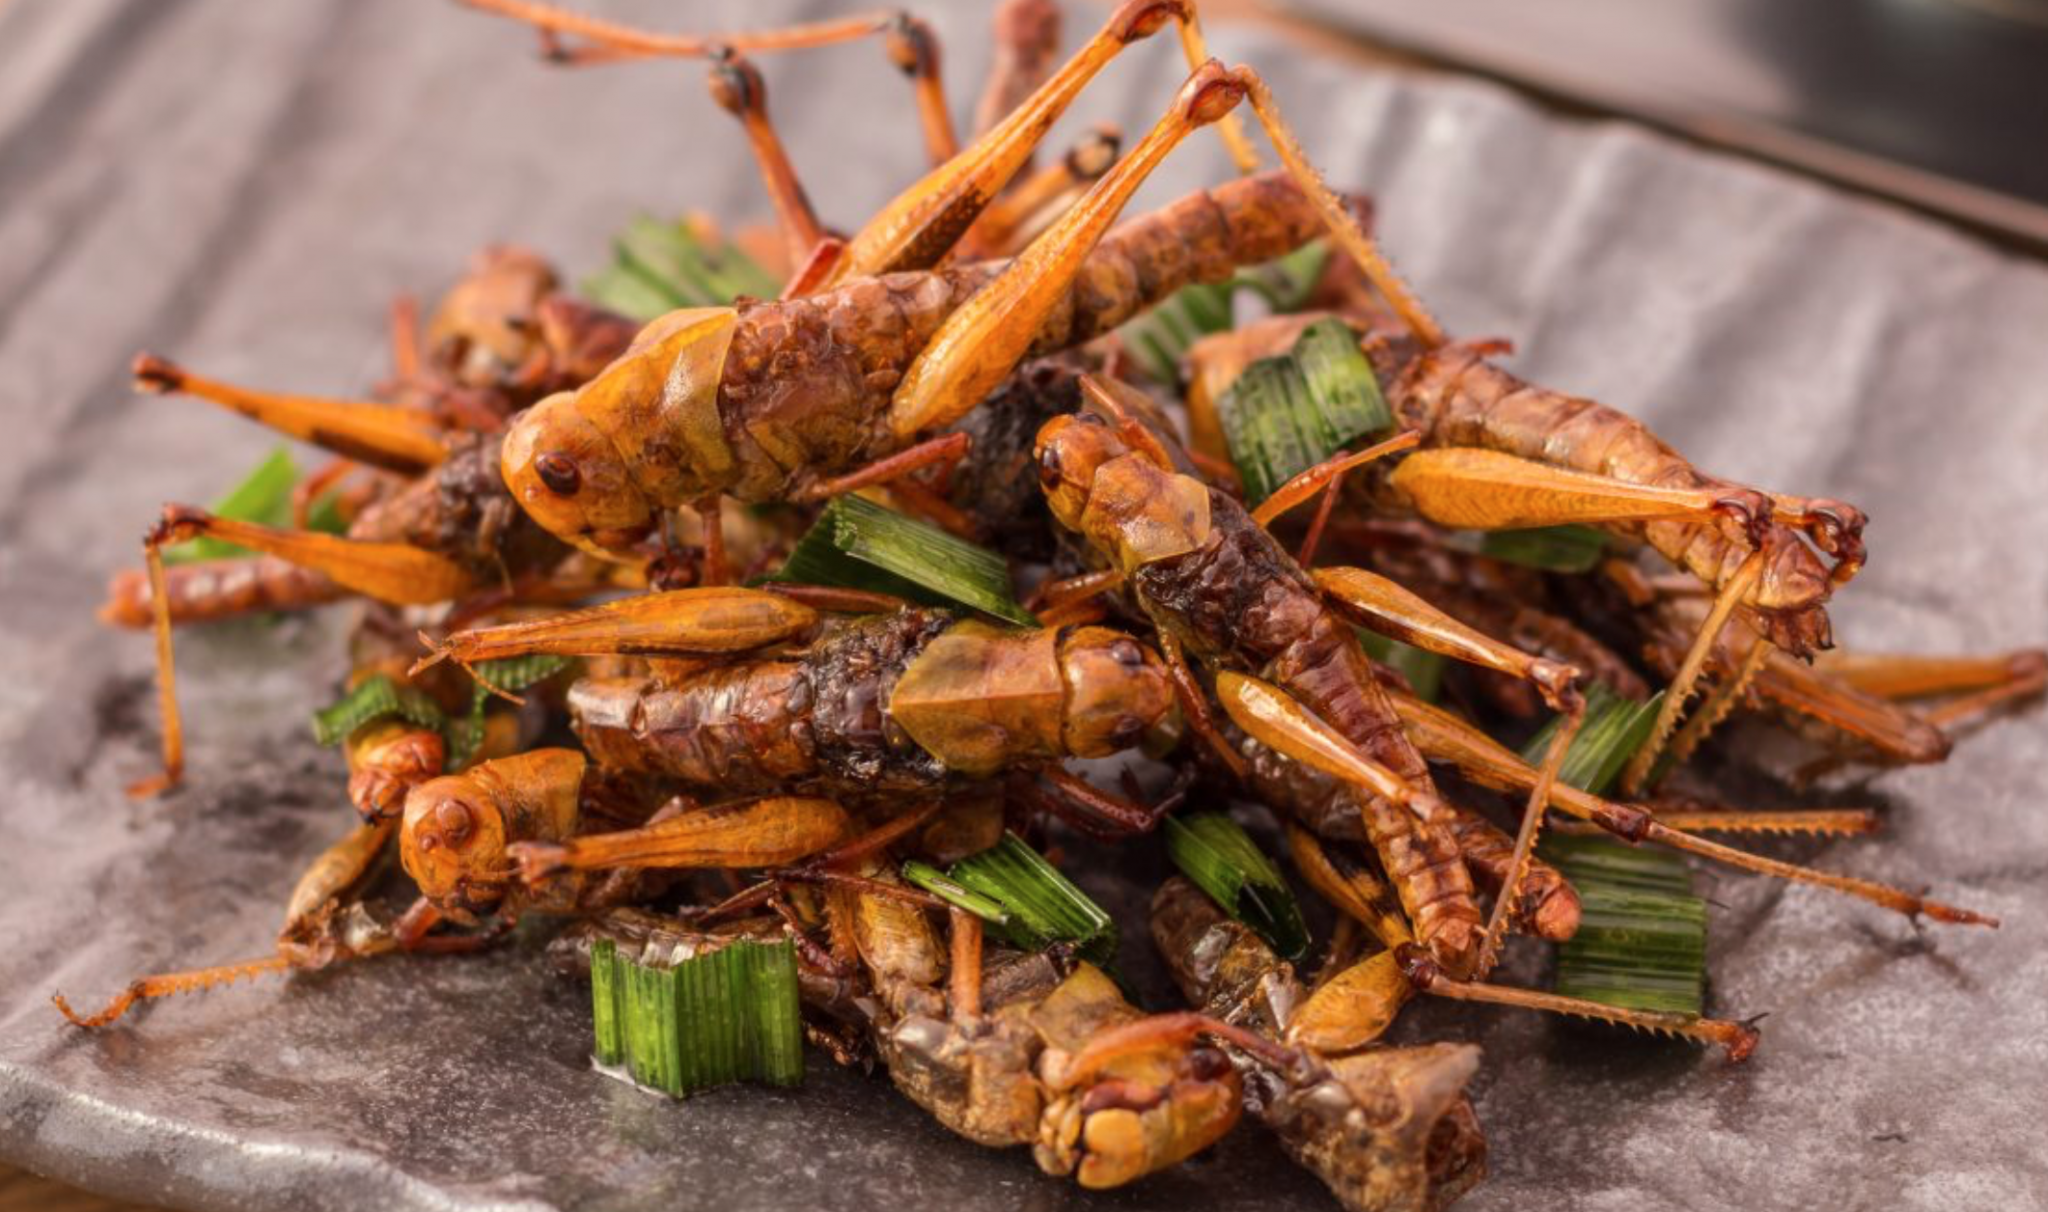 Picture of edible insects with seasoning 